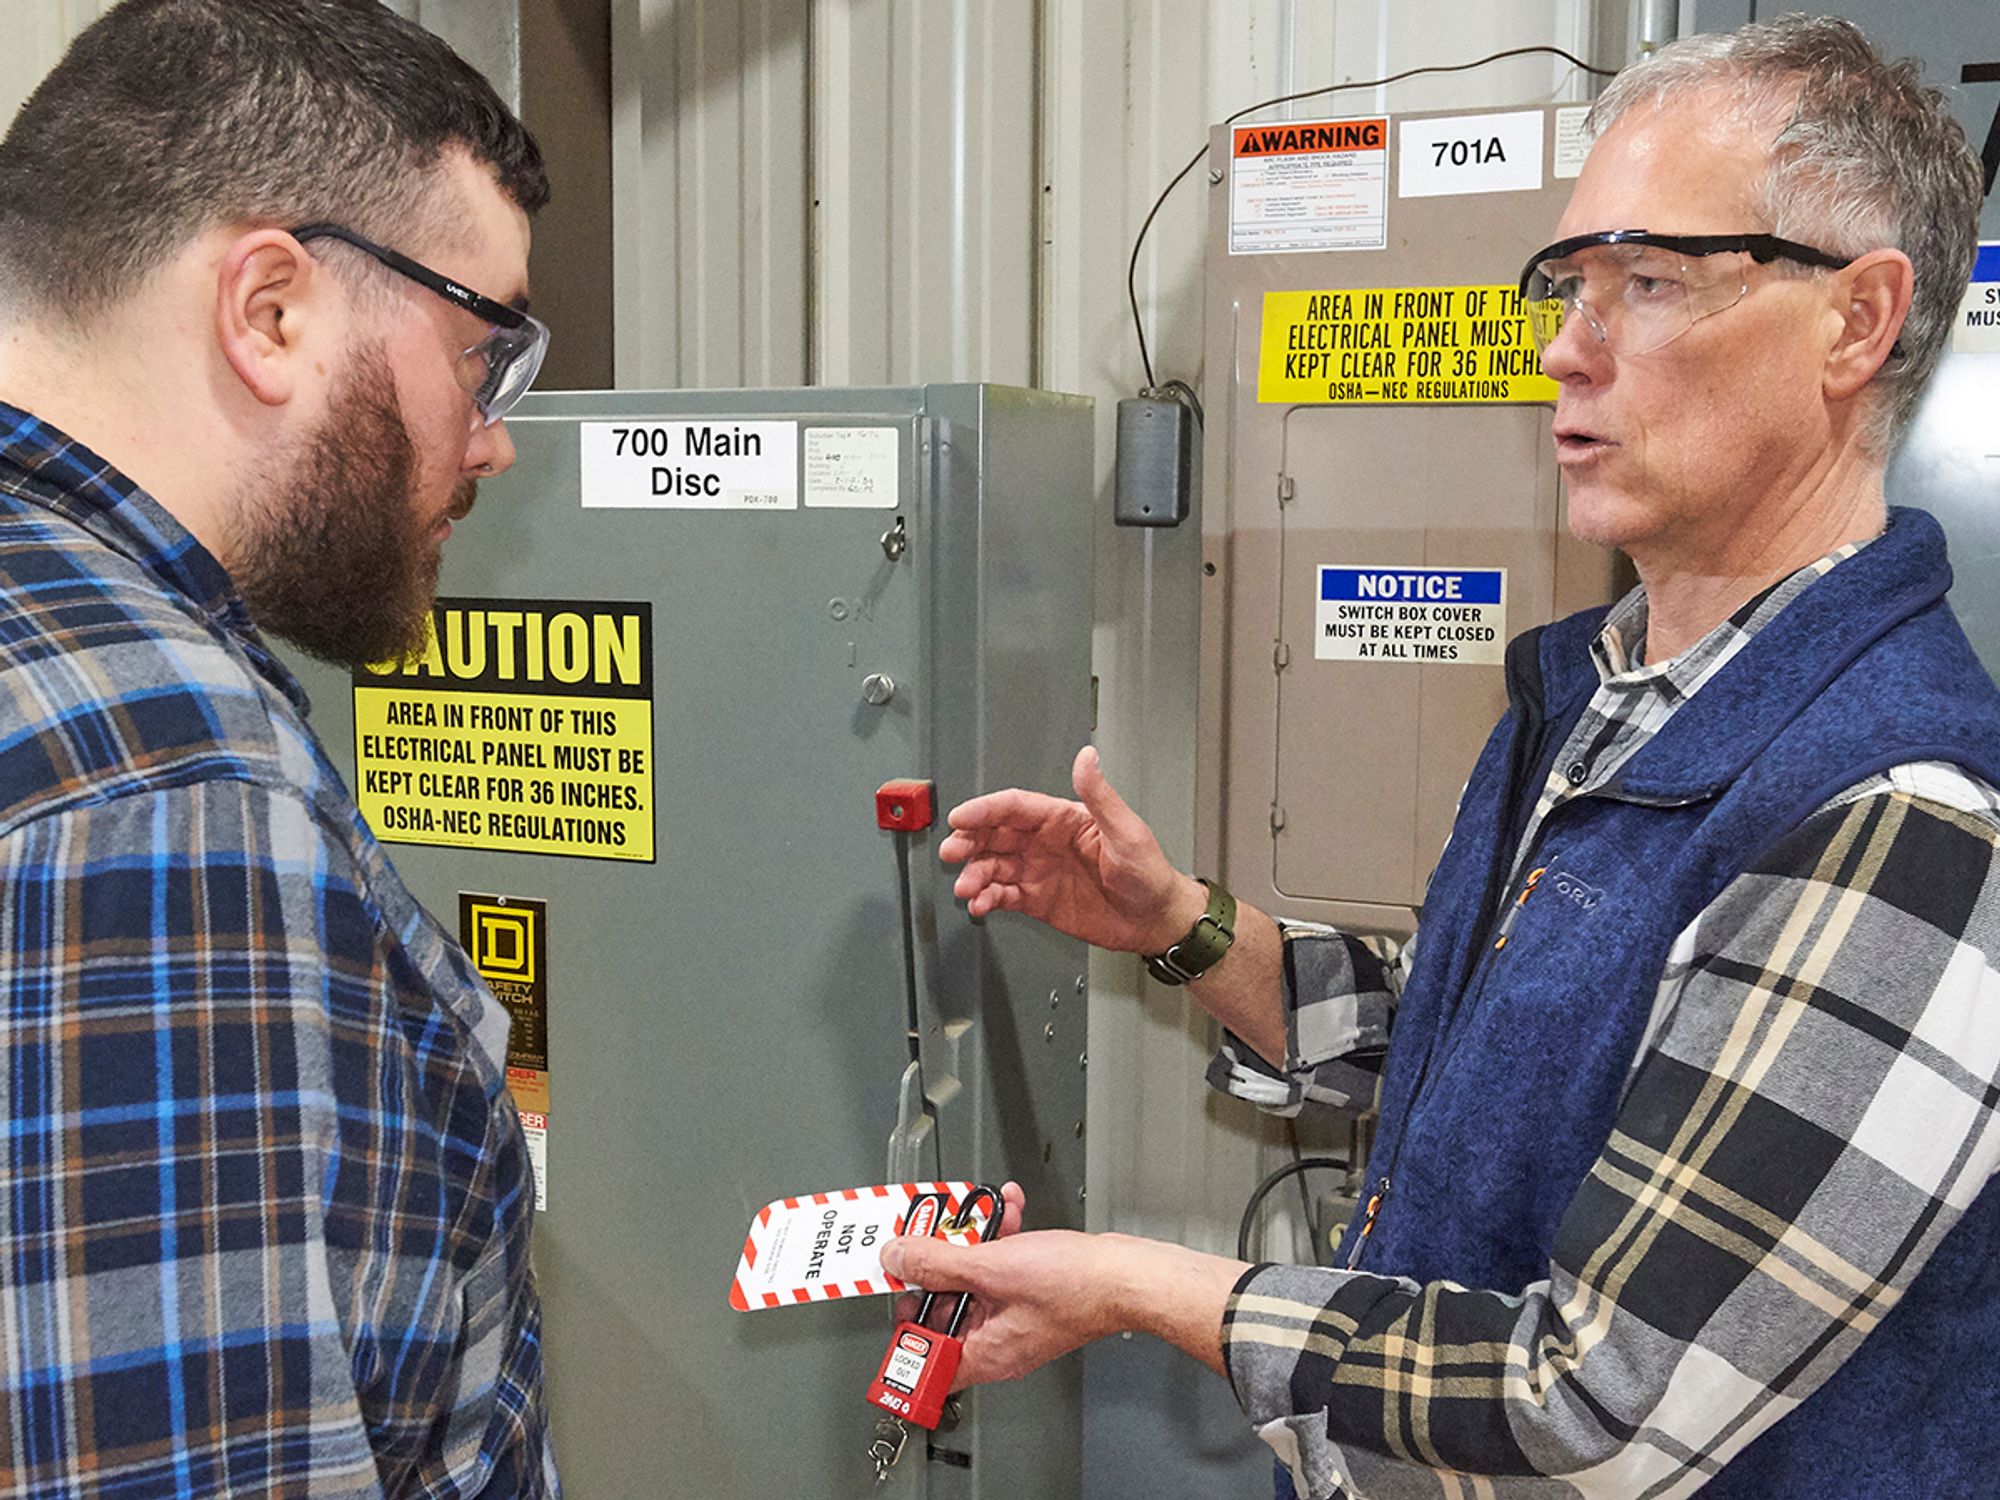 What training do employees need for lockout/tagout?